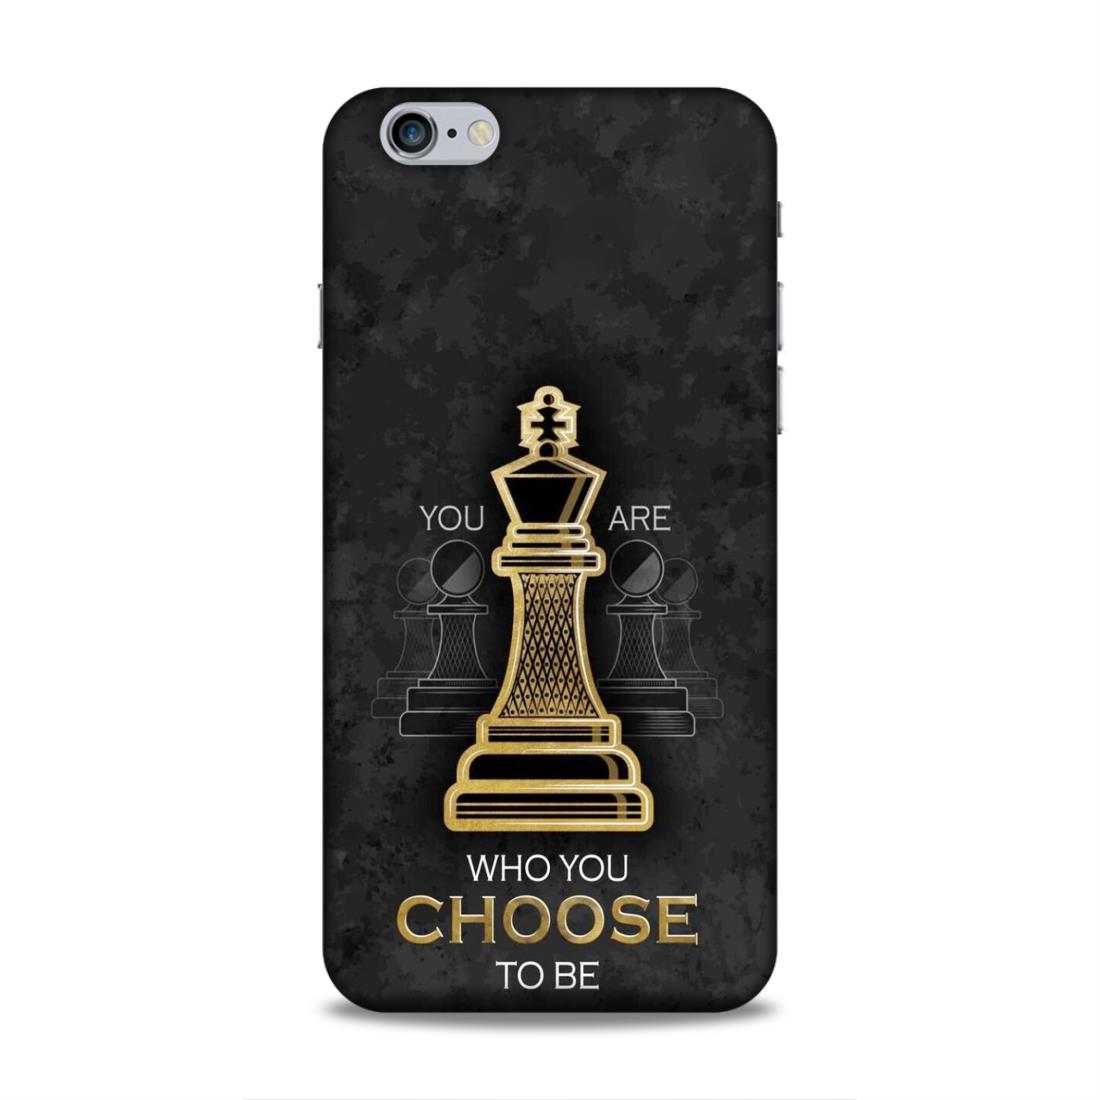 Who You Choose to Be Hard Back Case For Apple iPhone 6 Plus / 6s Plus